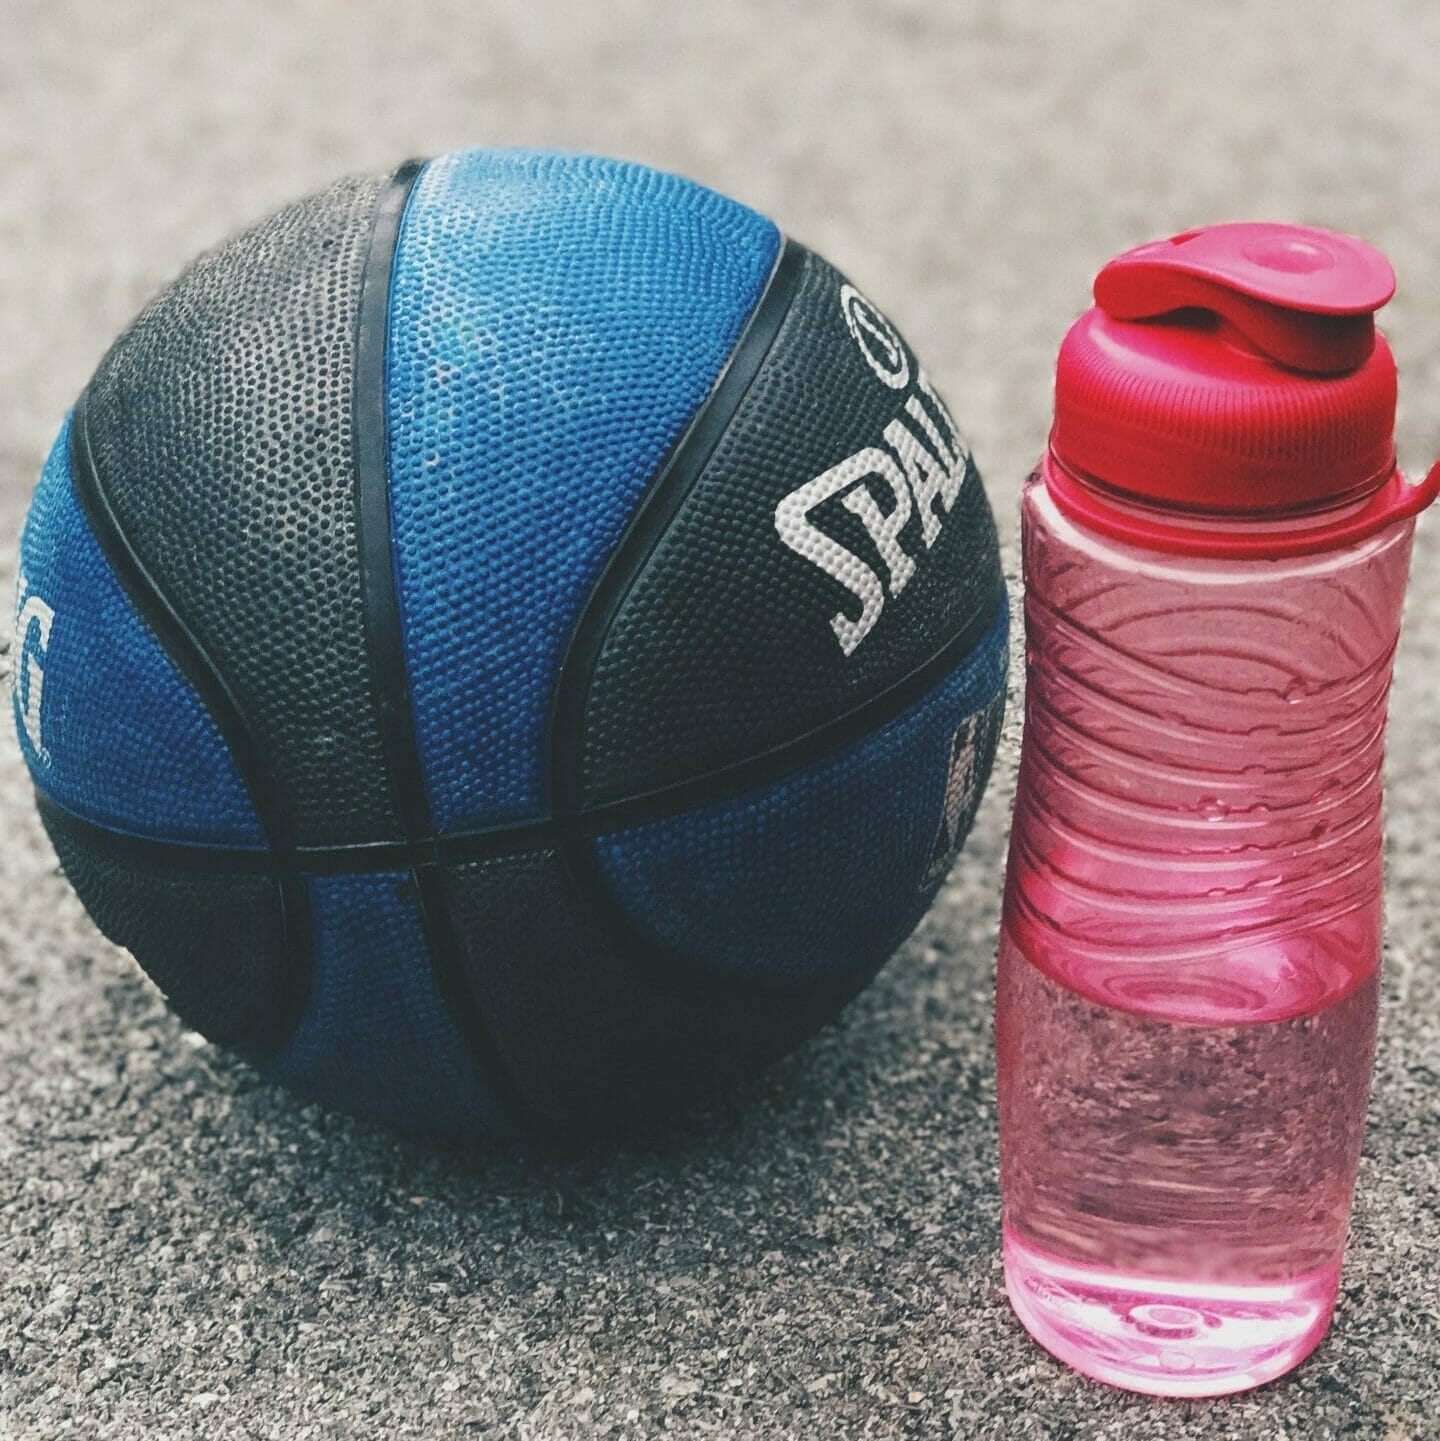 Basketball and bottled water edited